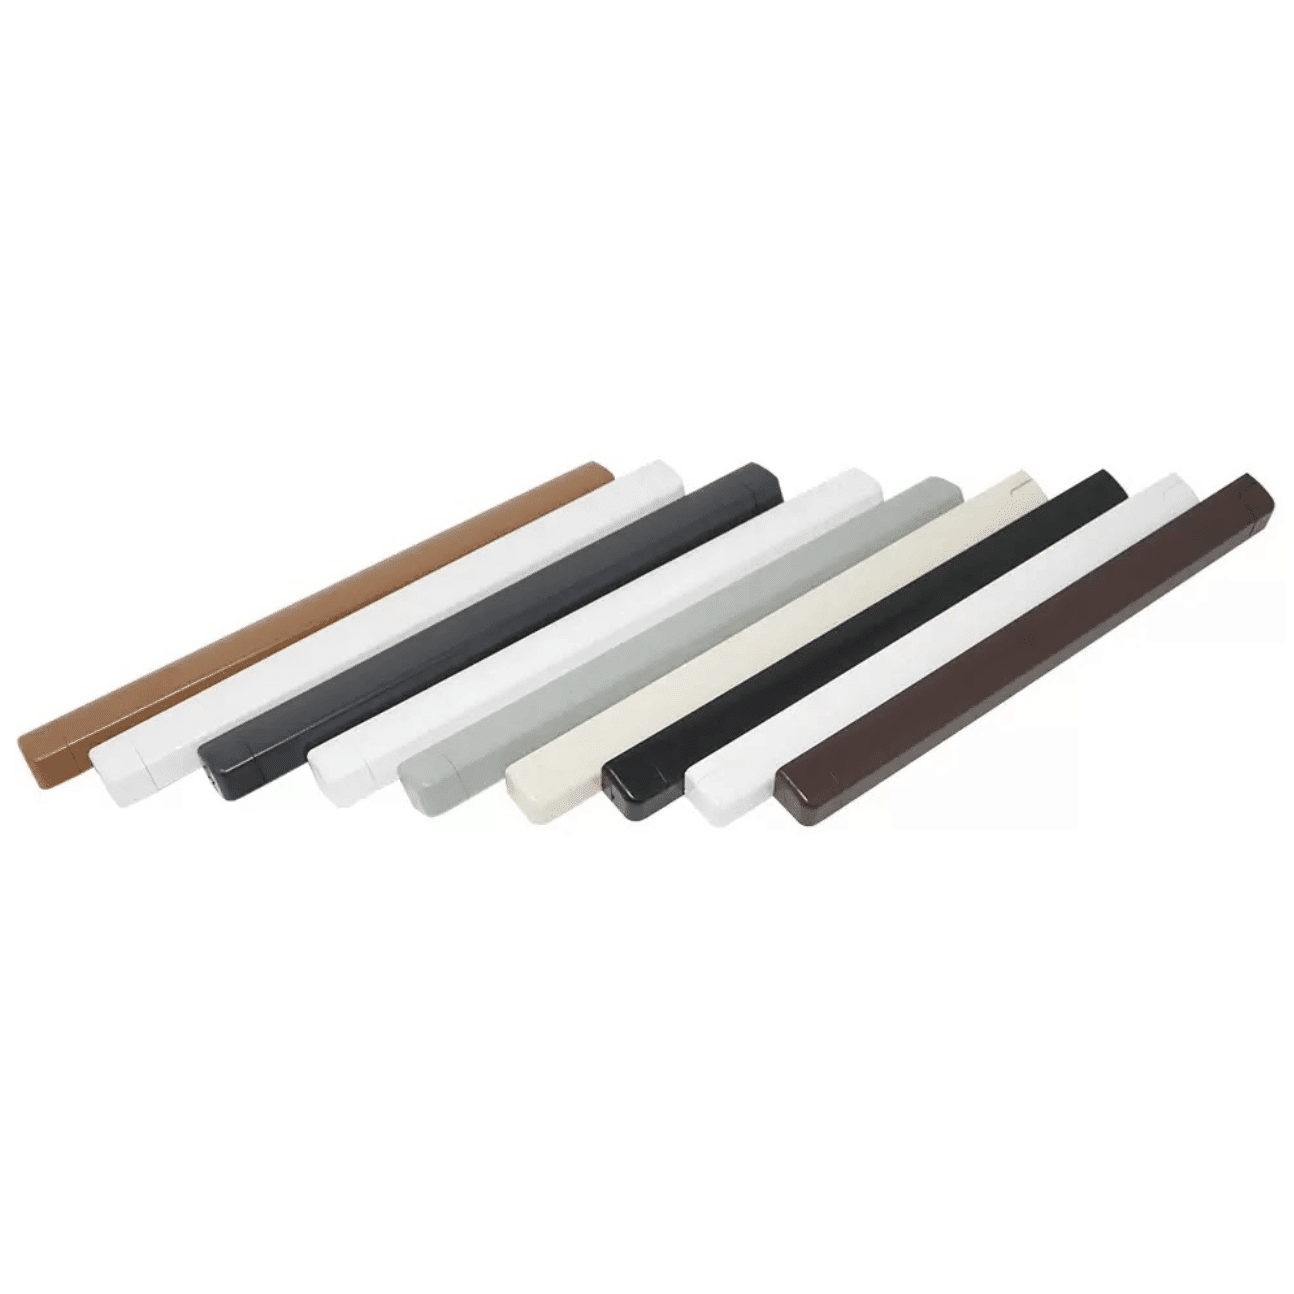 A selection of vibrant plastic rods on a plain background.